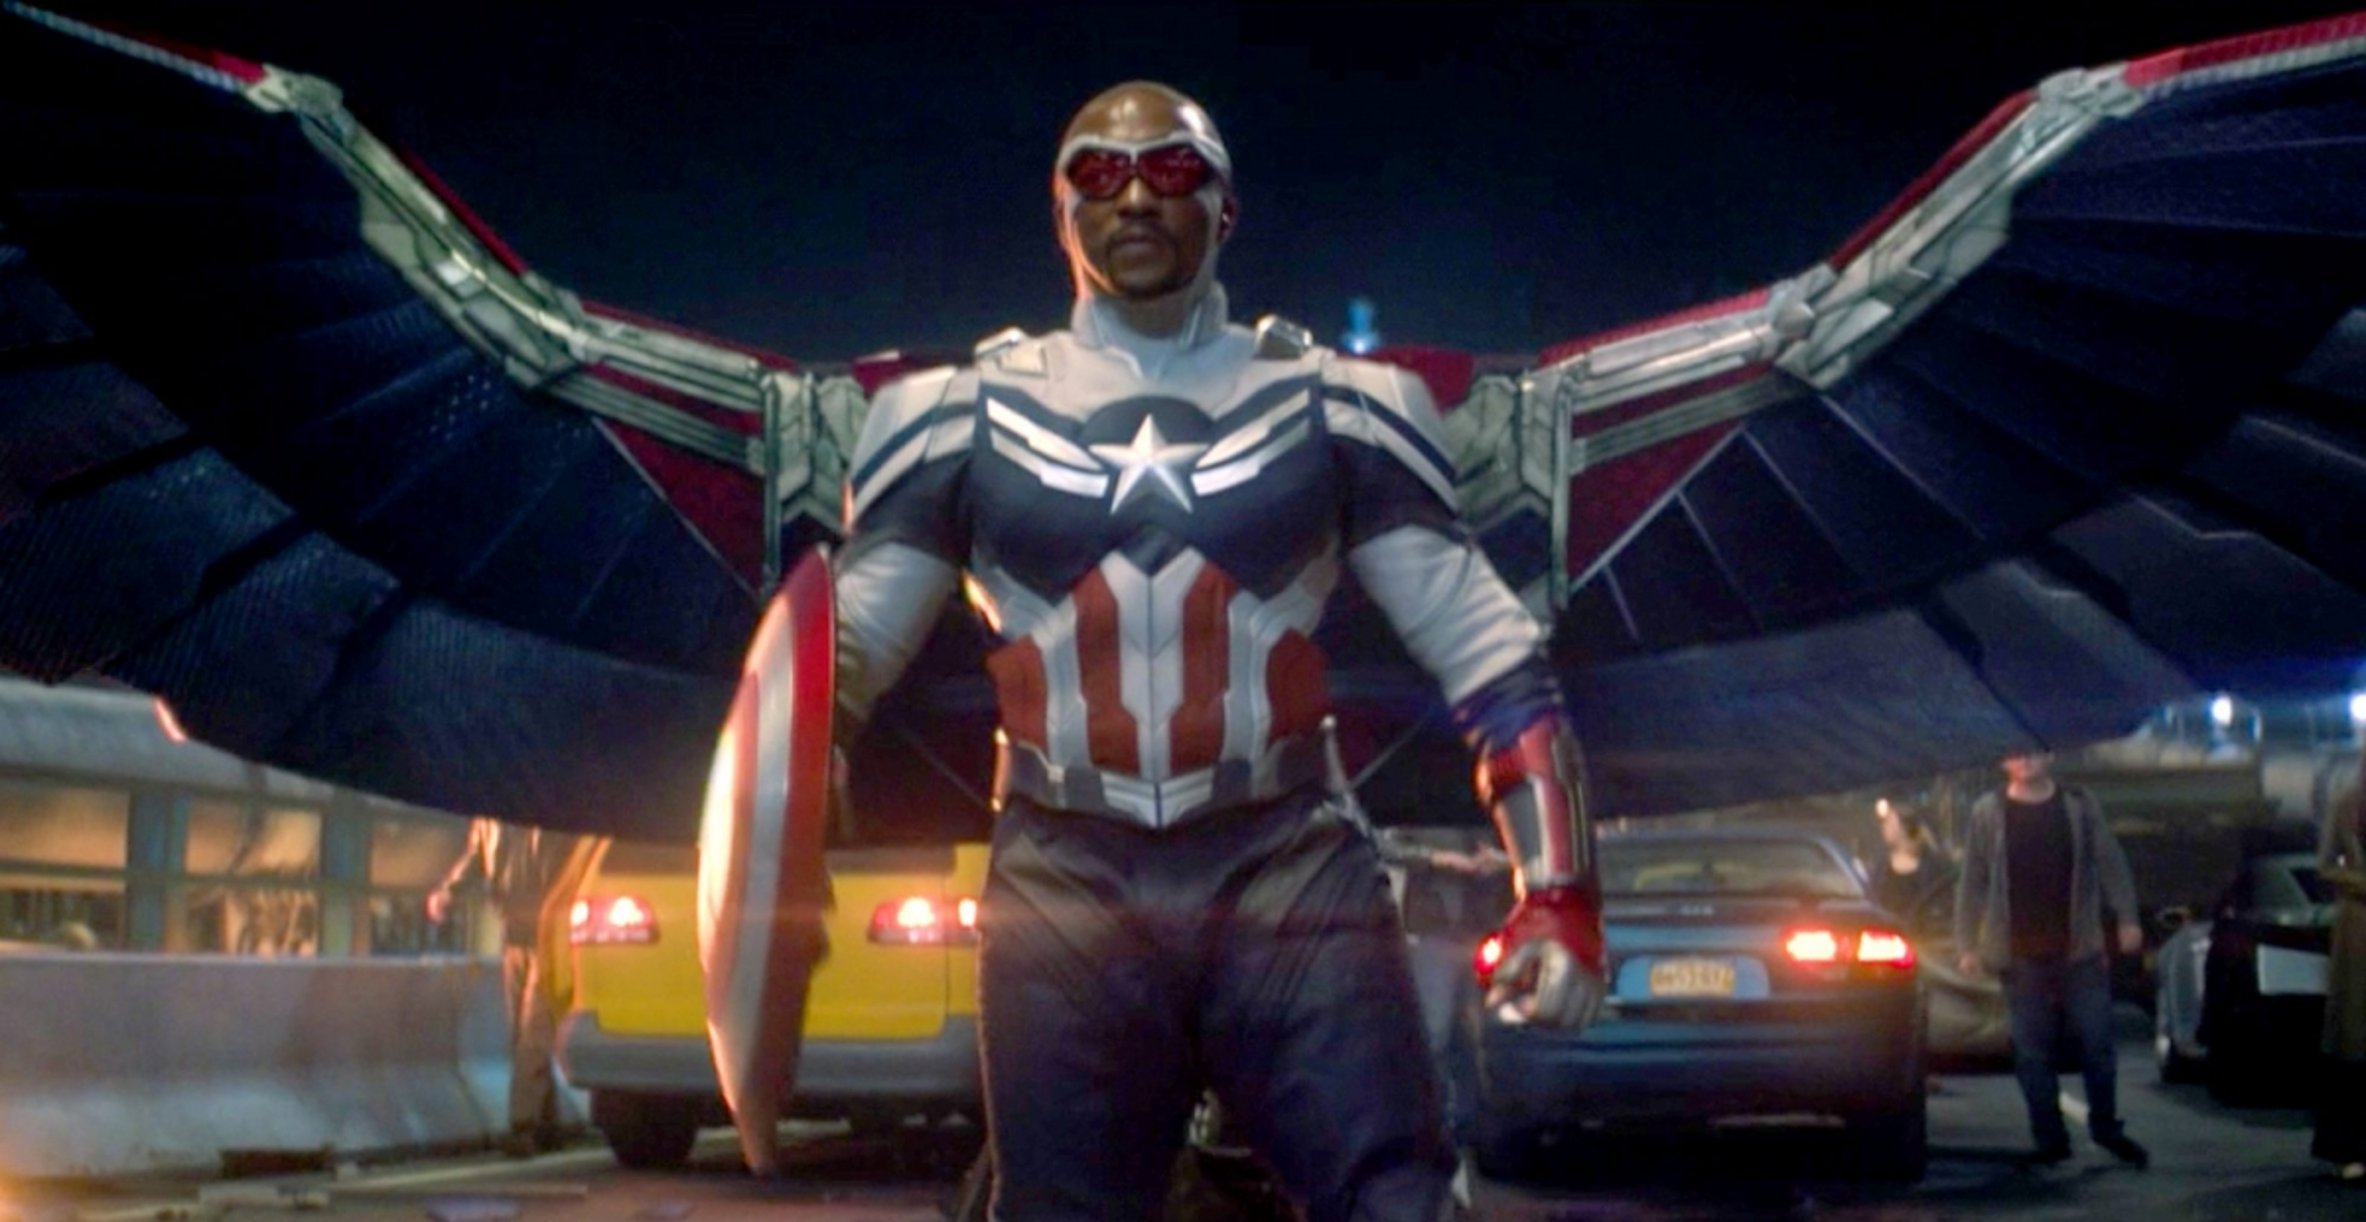 Falcon And Winter Soldier’s Head Writer Shares Why Karli Morgenthau’s Ending Had To Be ‘Emotional’ For Sam Wilson